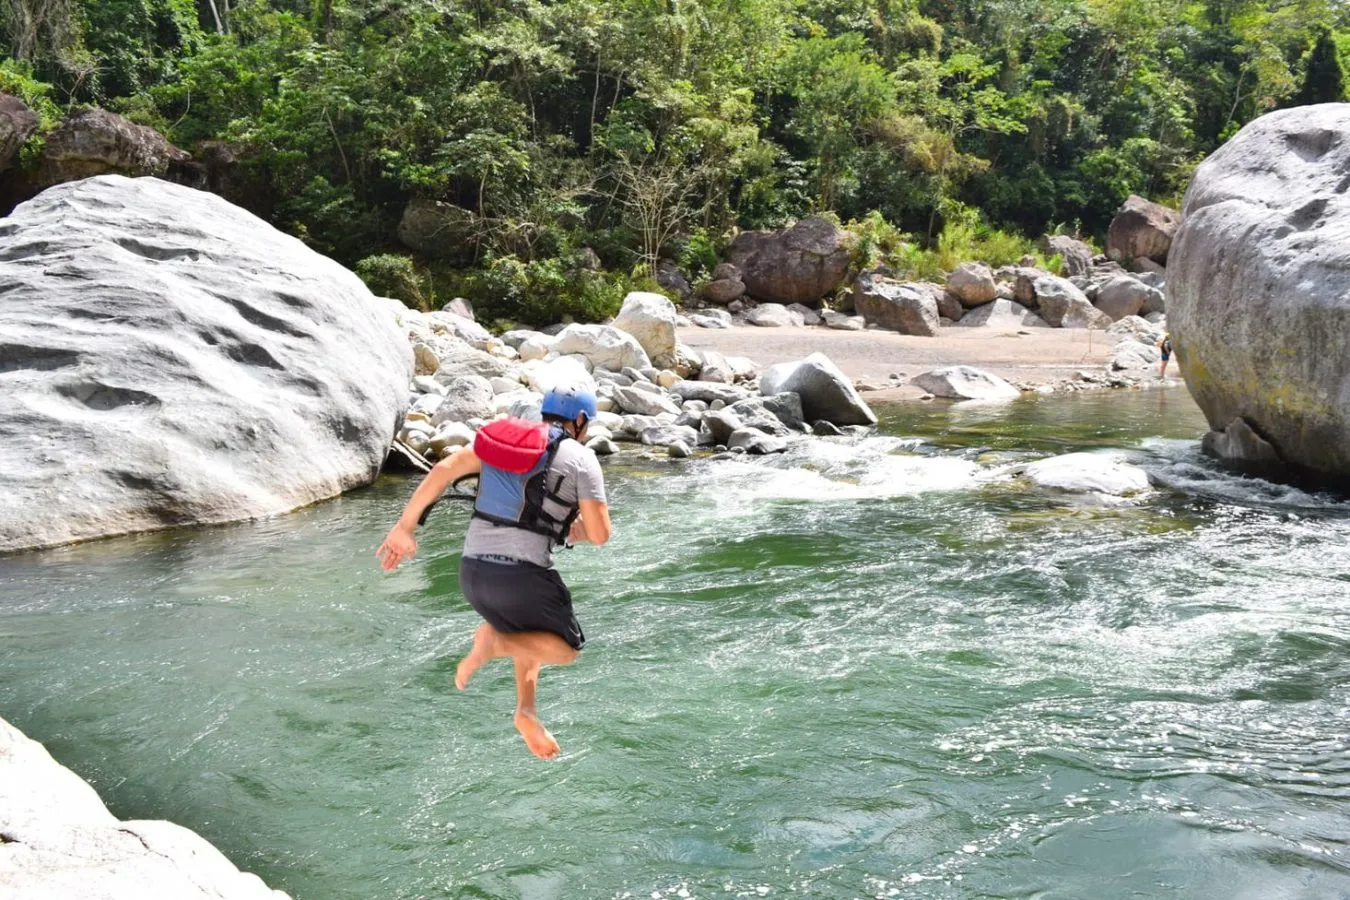 jeremy storm jumping into rio cangrejal during a trip whitewater rafting in honduras